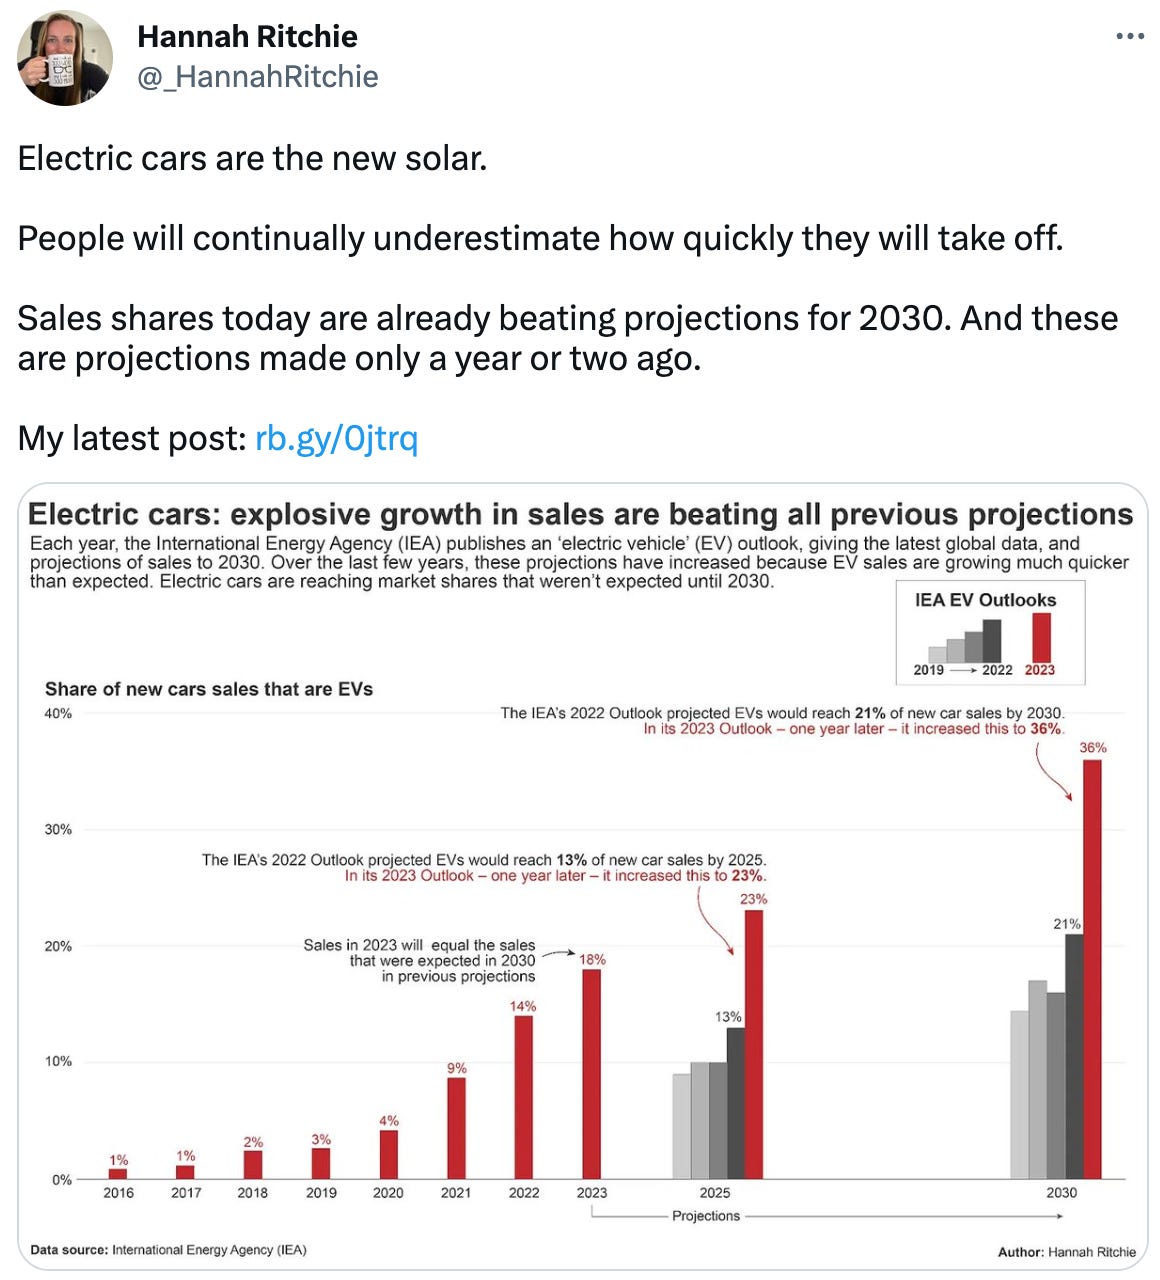  Hannah Ritchie @_HannahRitchie Electric cars are the new solar.  People will continually underestimate how quickly they will take off.  Sales shares today are already beating projections for 2030. And these are projections made only a year or two ago.  My latest post: https://rb.gy/0jtrq